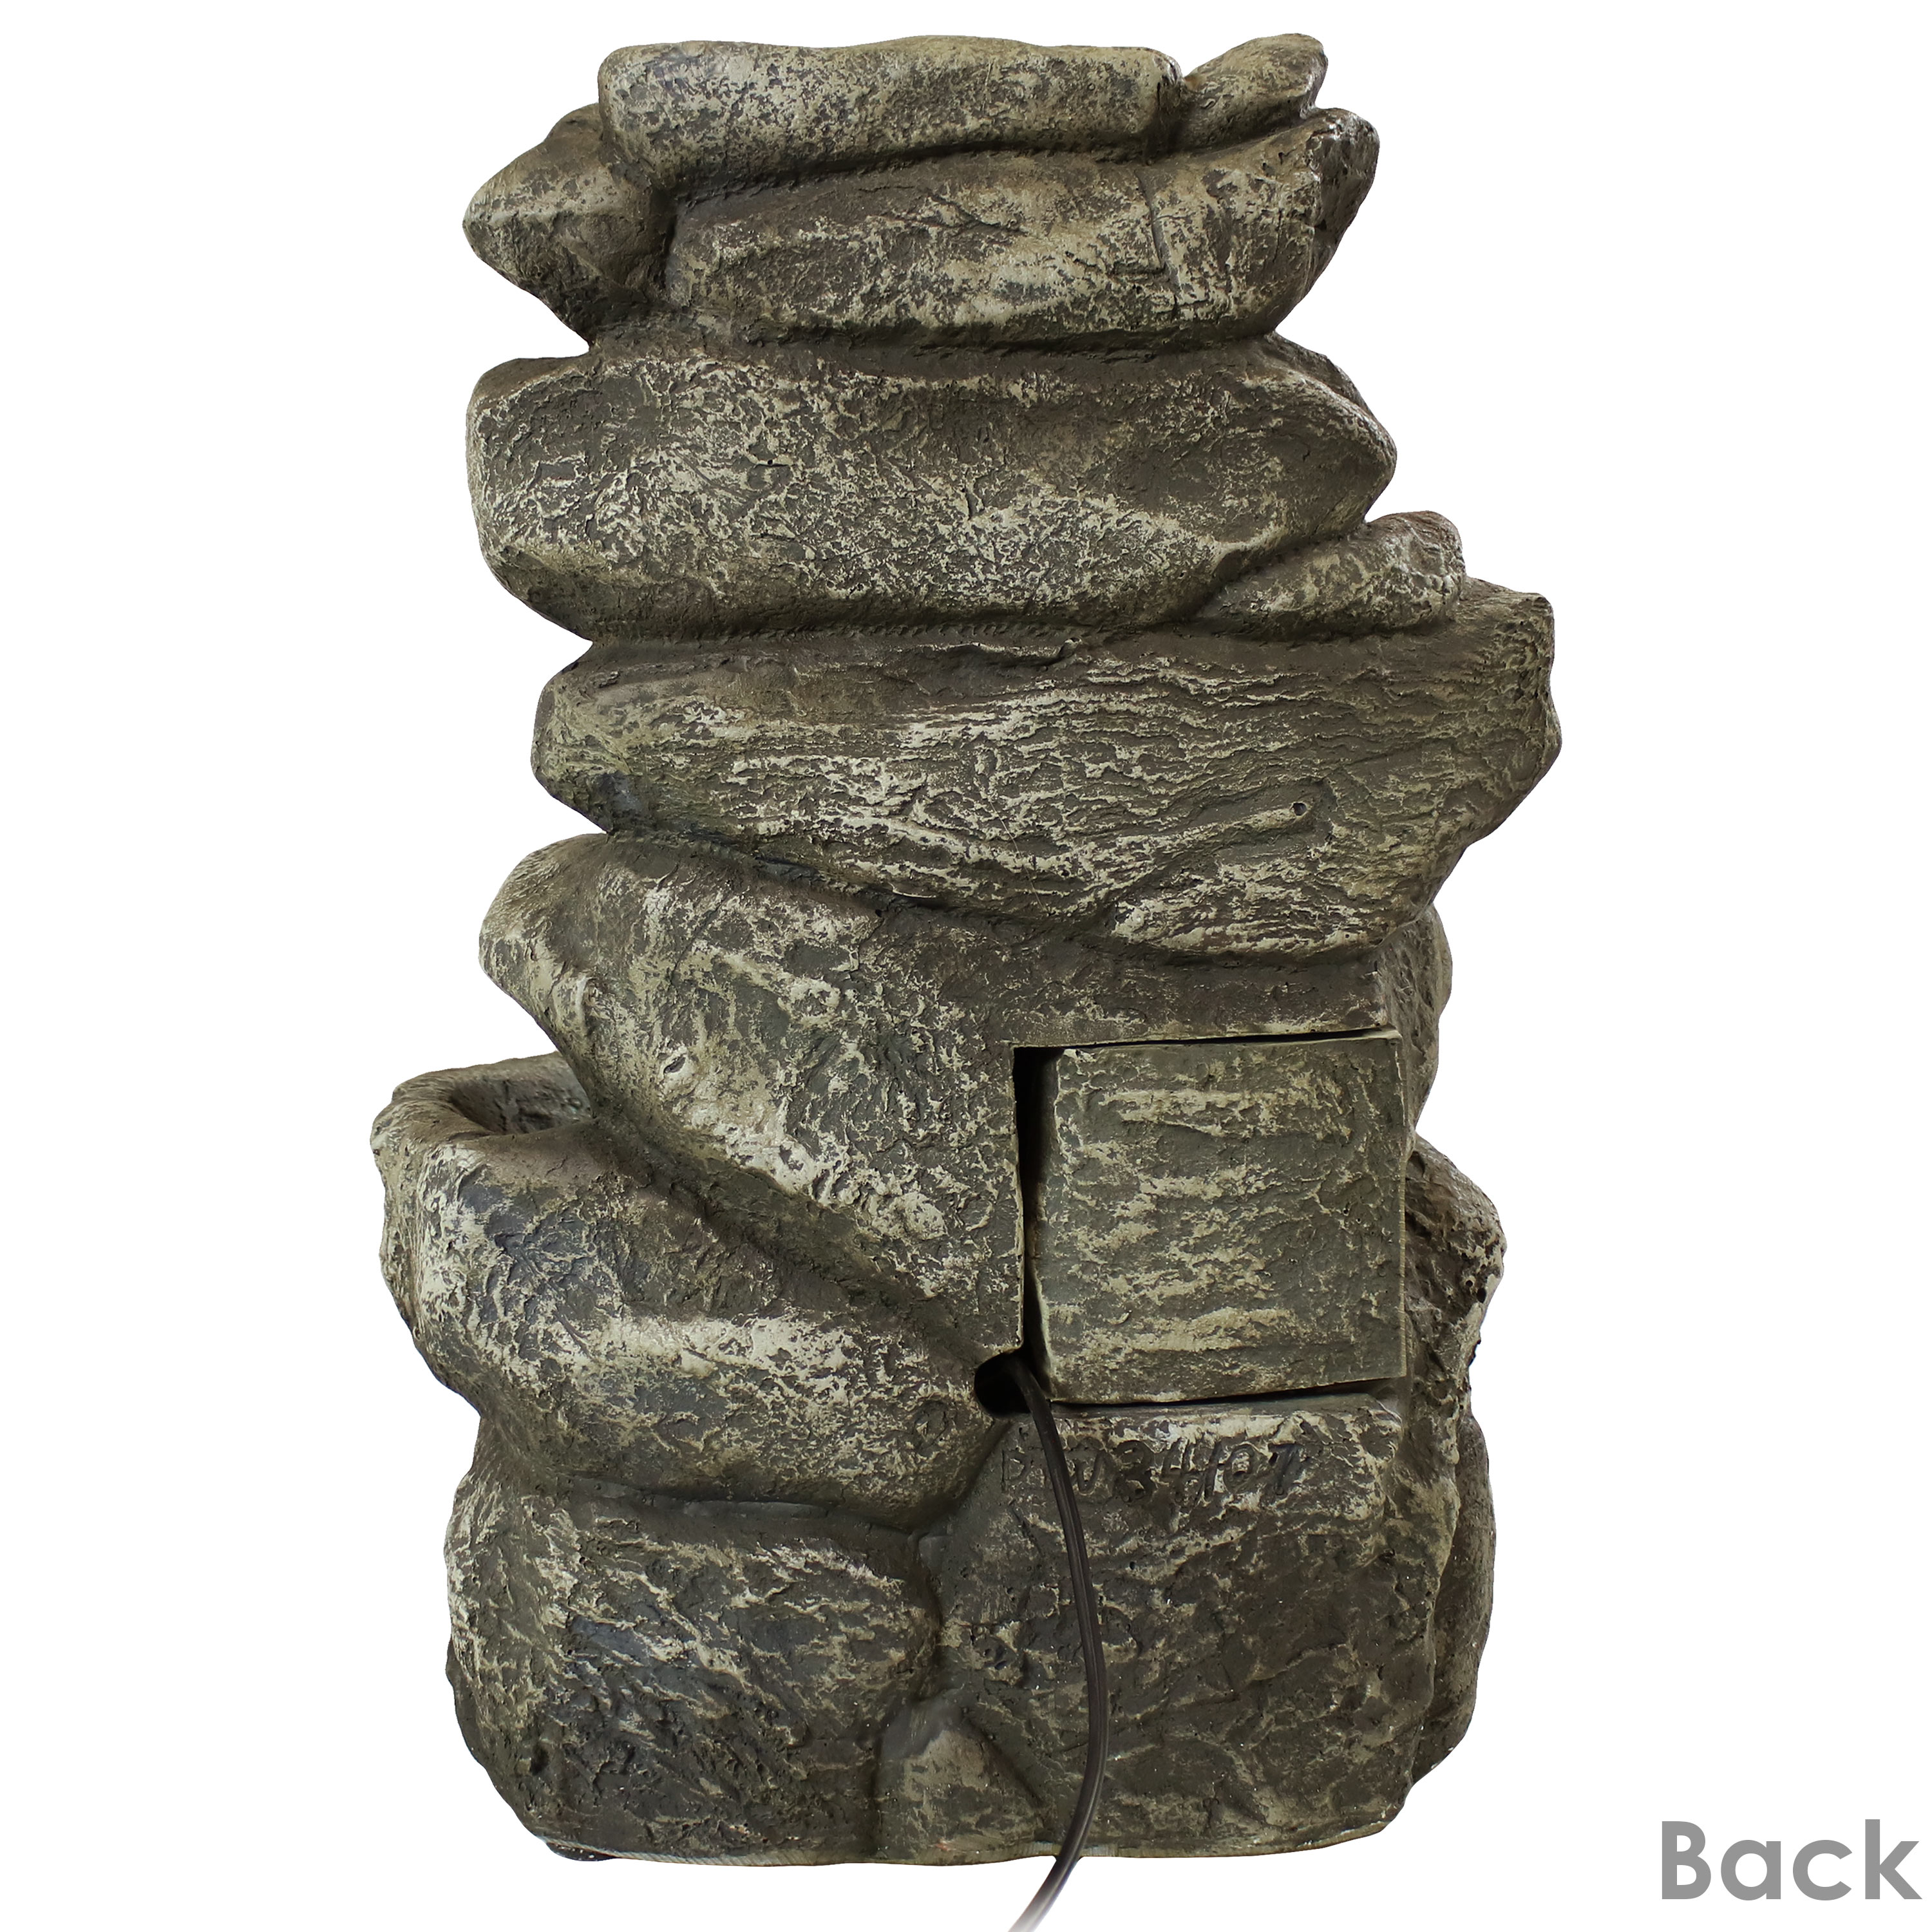 15" Sunnydaze 6 Tier Stone Falls Tabletop Indoor Water Fountain Feature w/ LED 